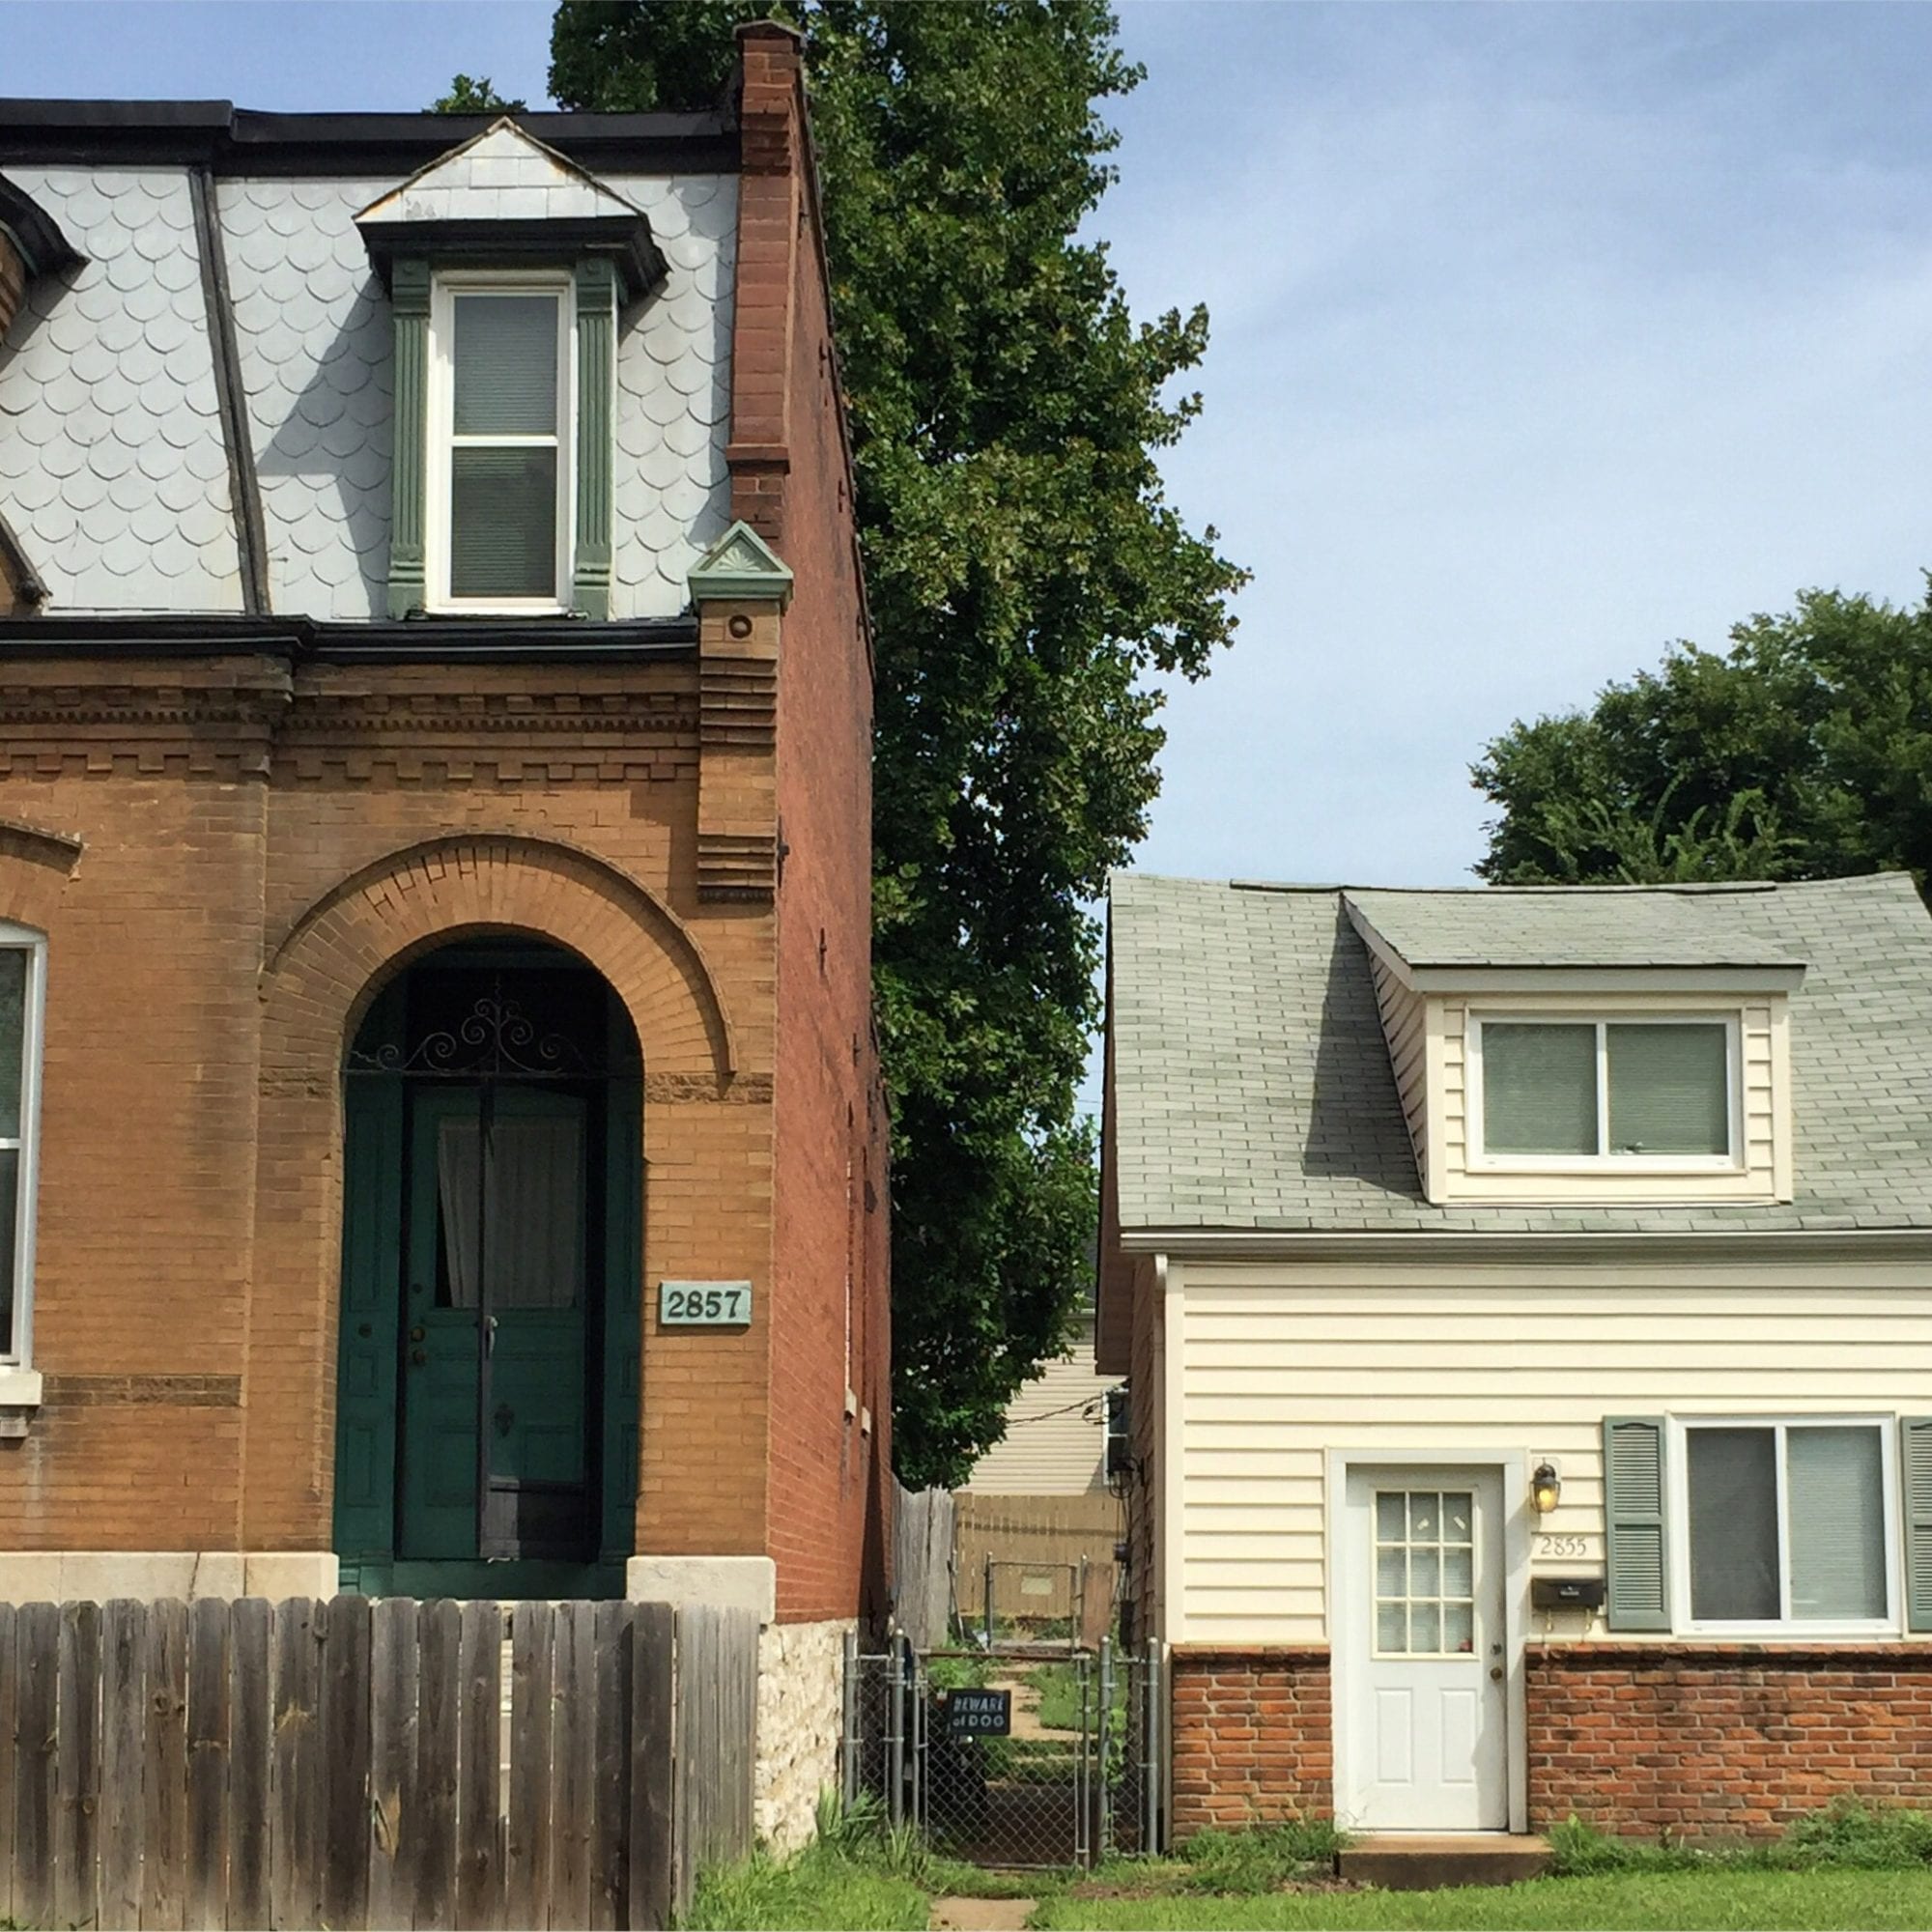 Contrasting architectural styles in Dutchtown, St. Louis. Photo by Josh Burbridge.